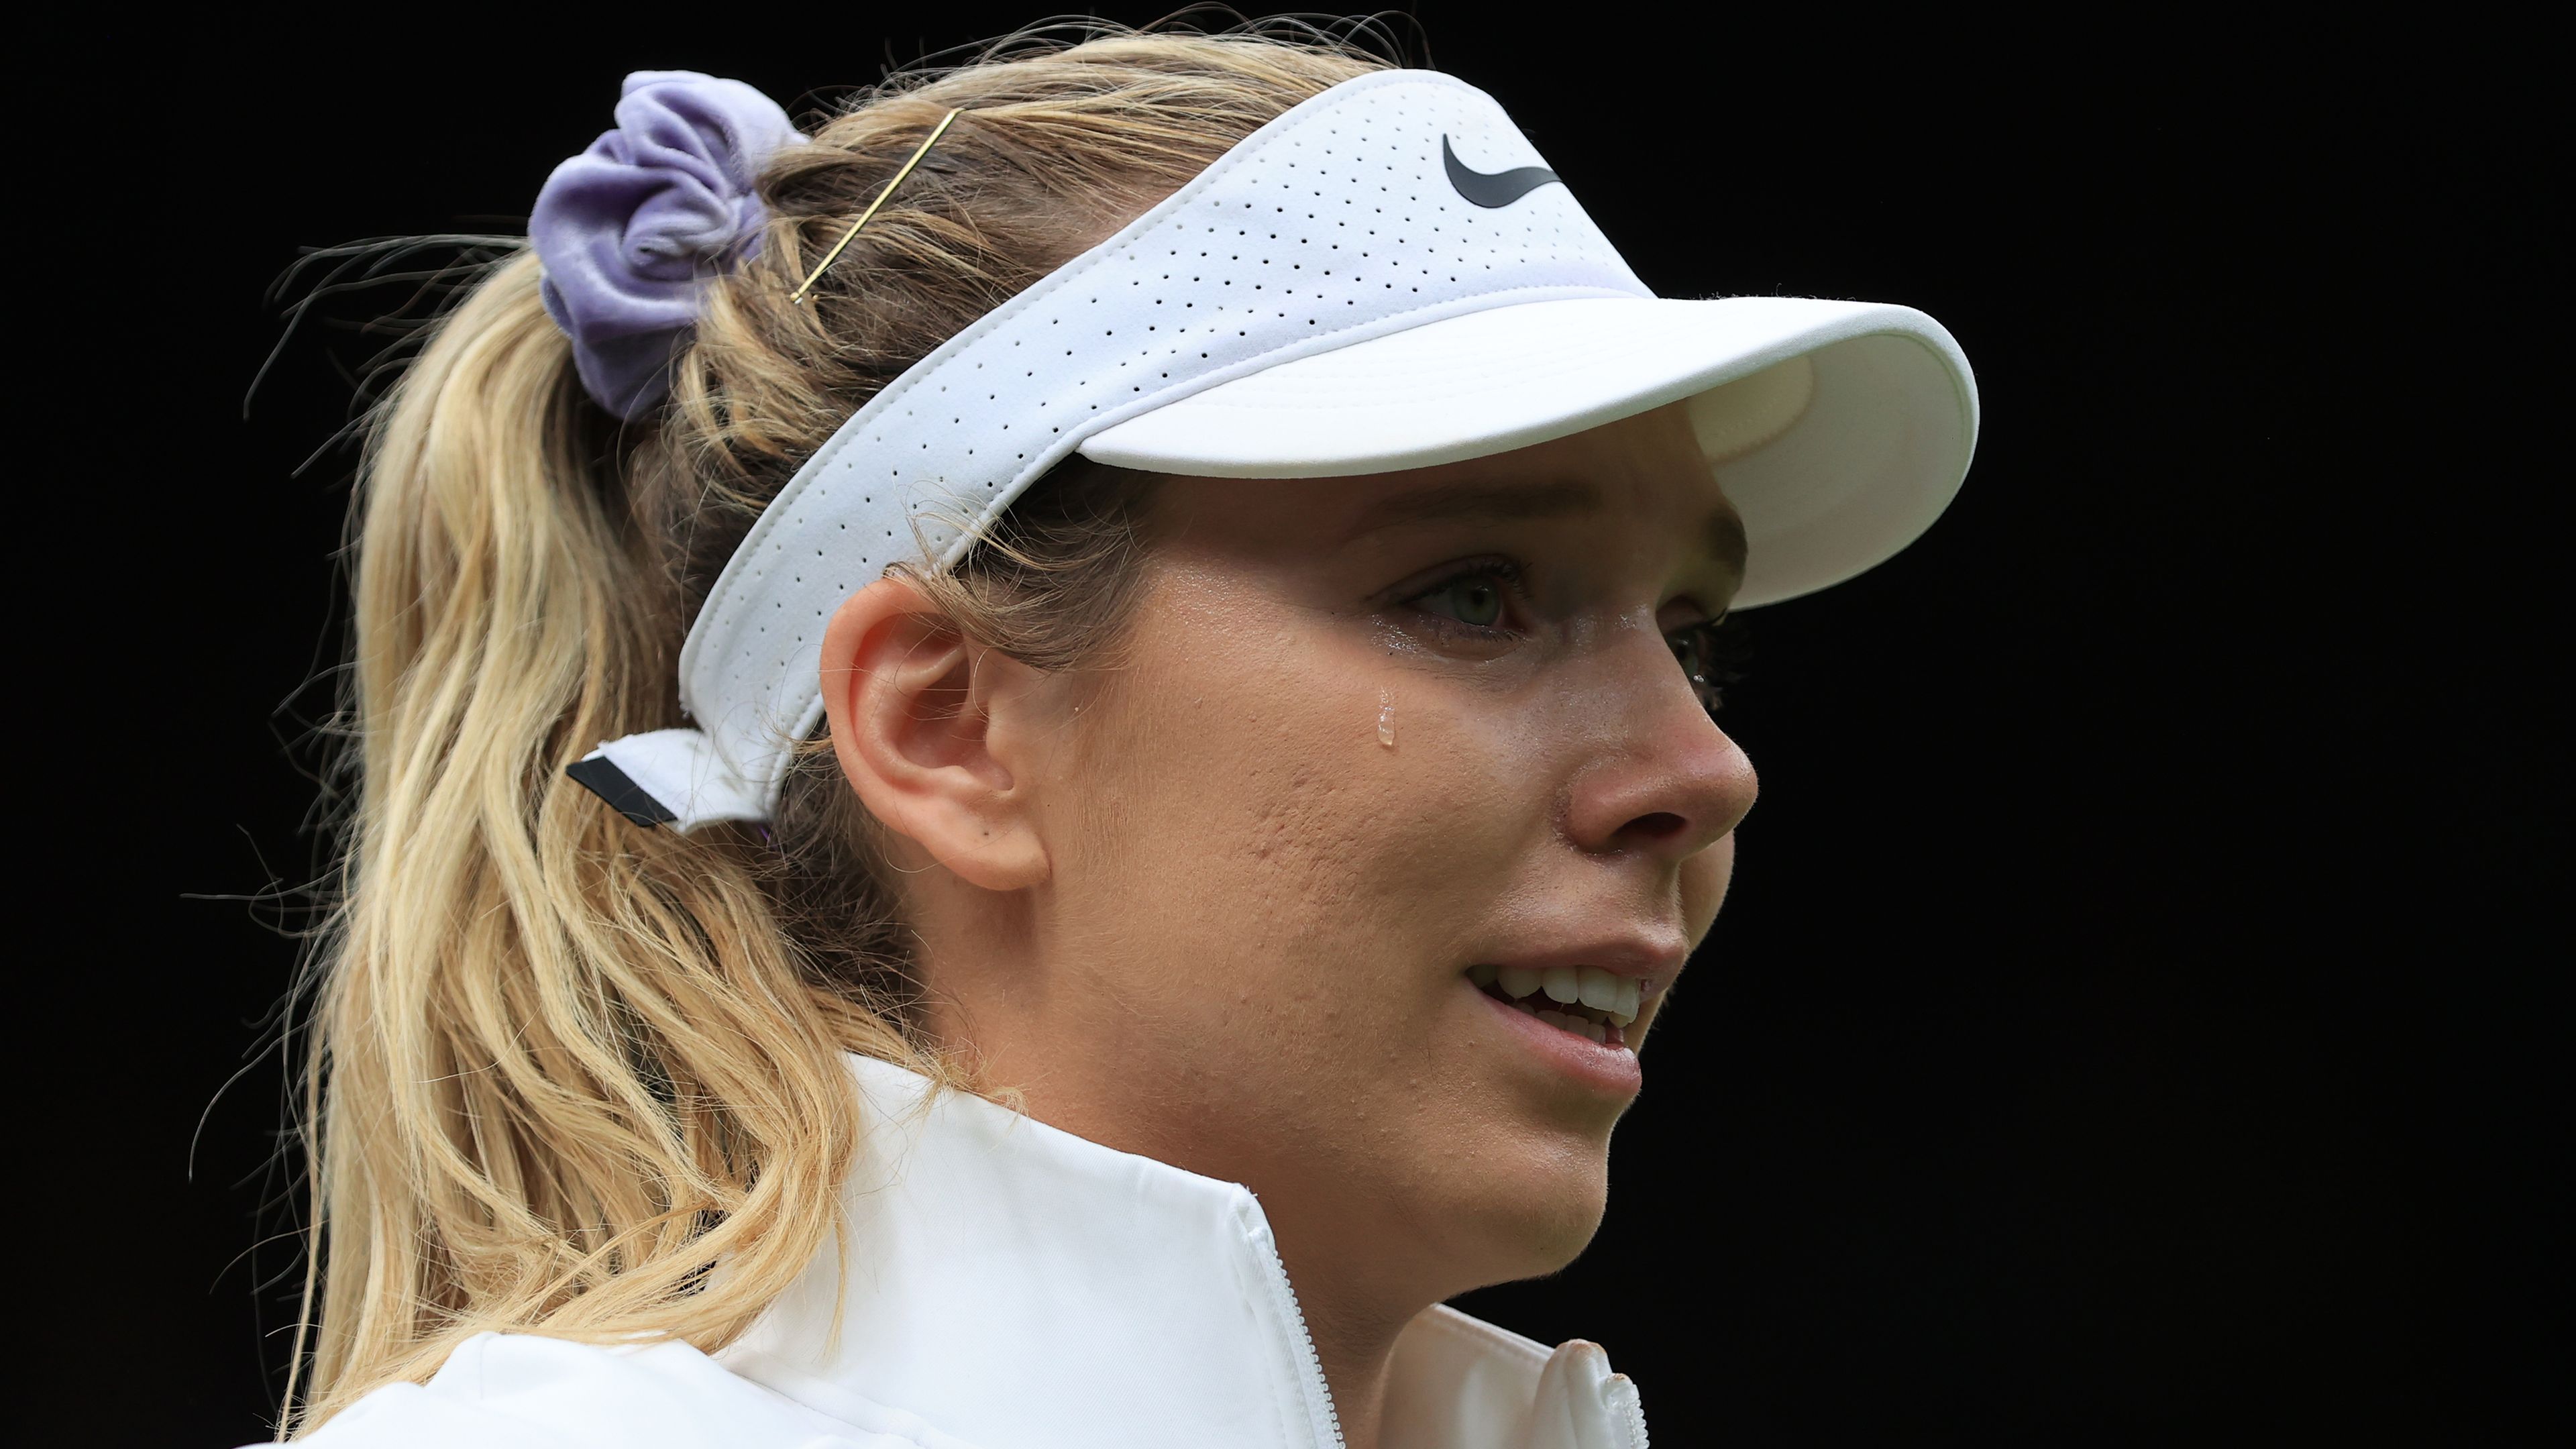 British player Katie Boulter breaks down in tears, dedicates Wimbledon win to late grandmother